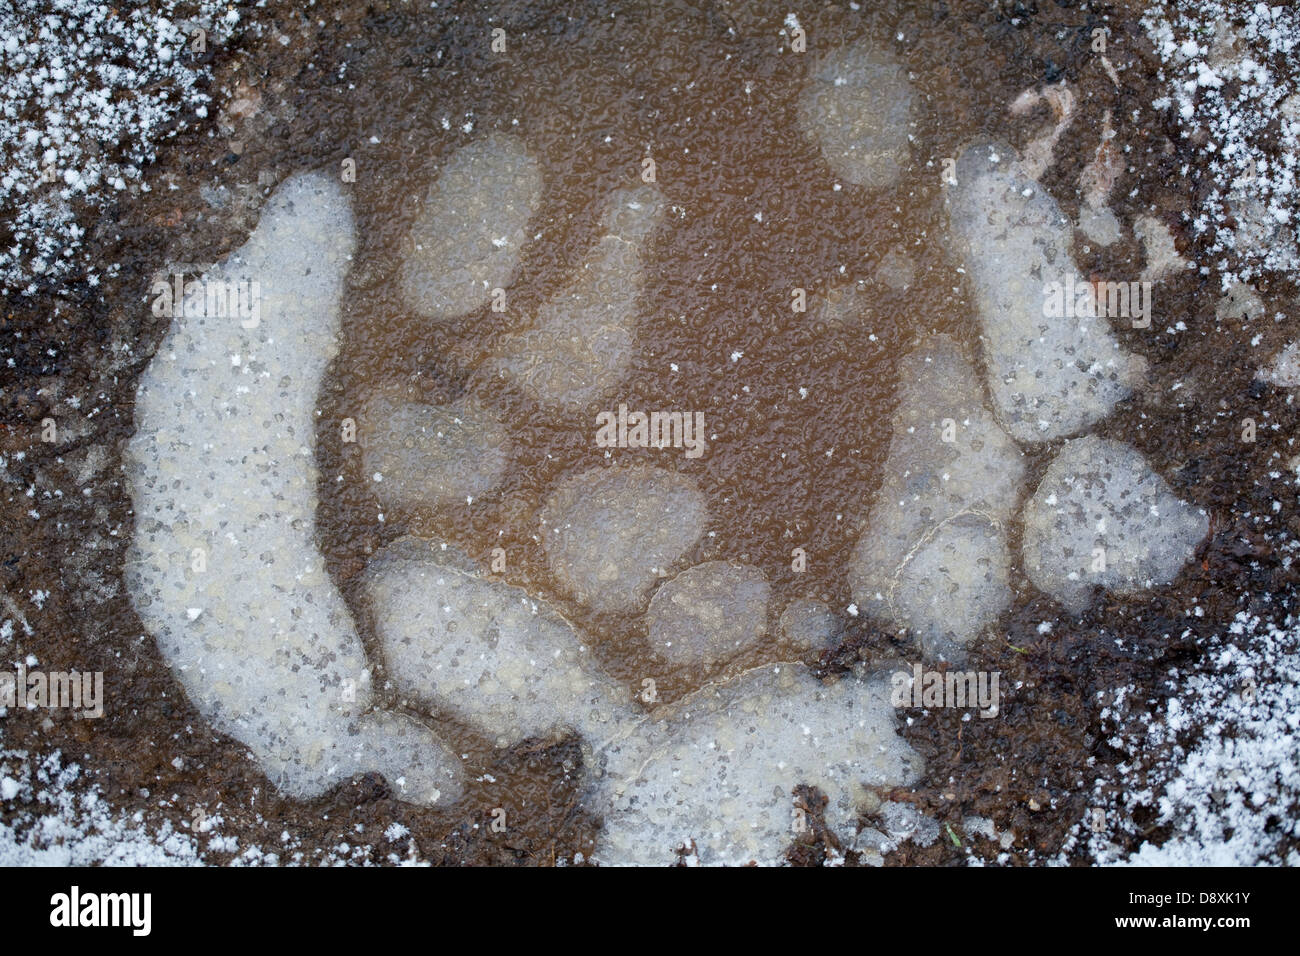 Frozen puddle on a rural trackway. Showing fallen hail stones on ground and on the ice surface, with trapped air bubbles beneath Stock Photo